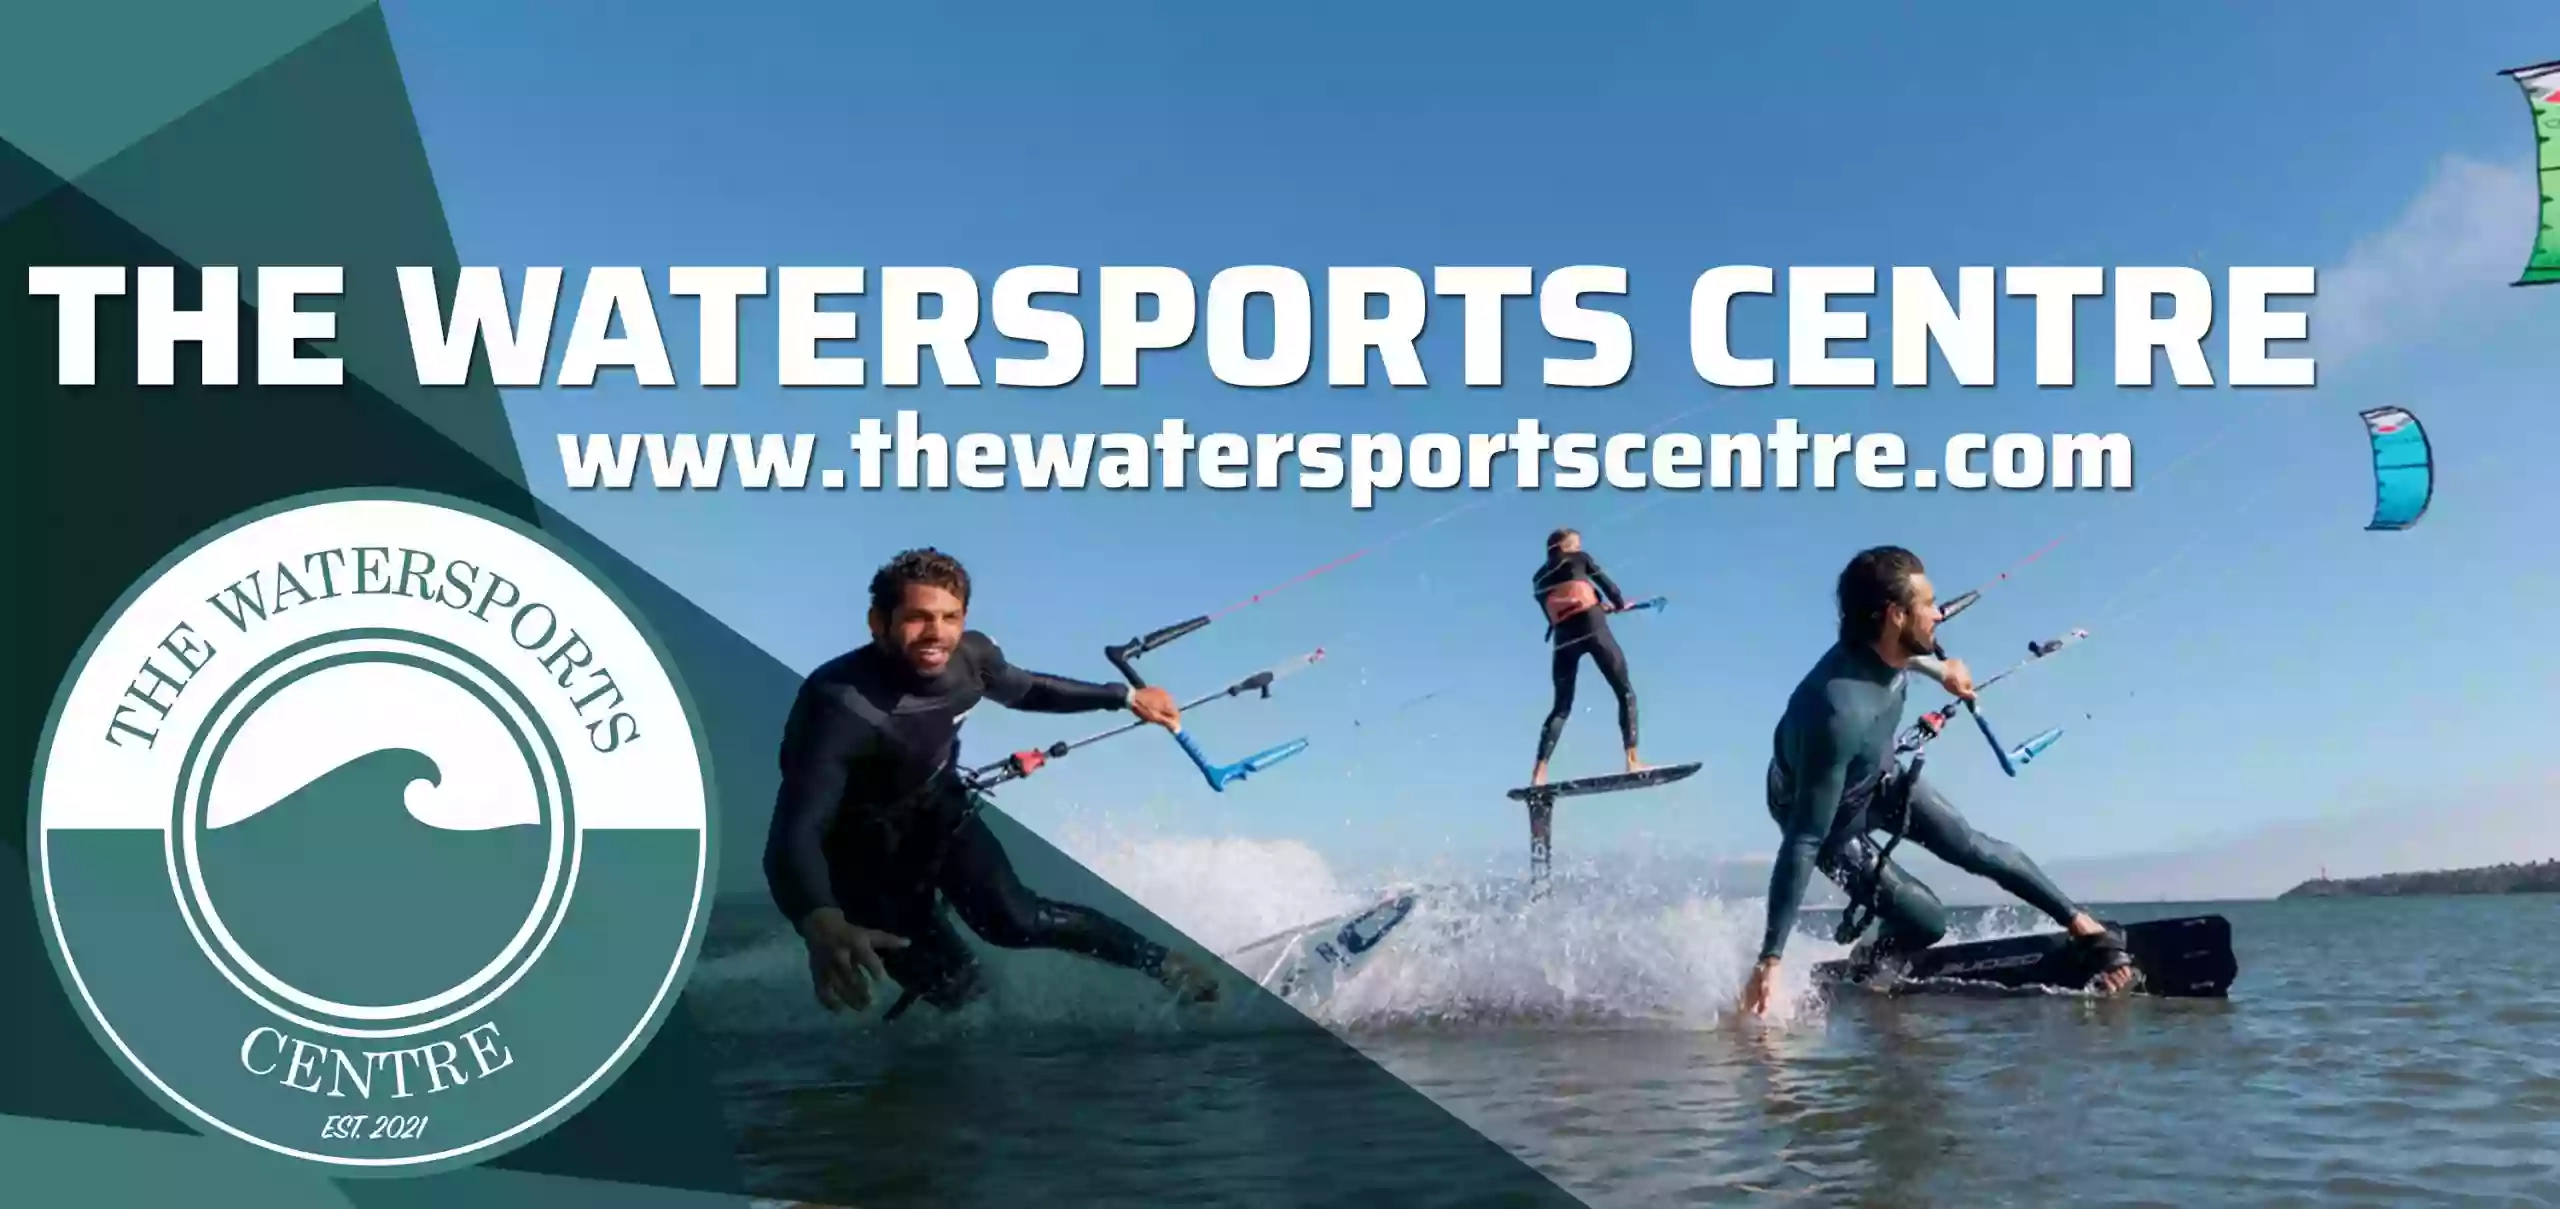 The Watersports Centre